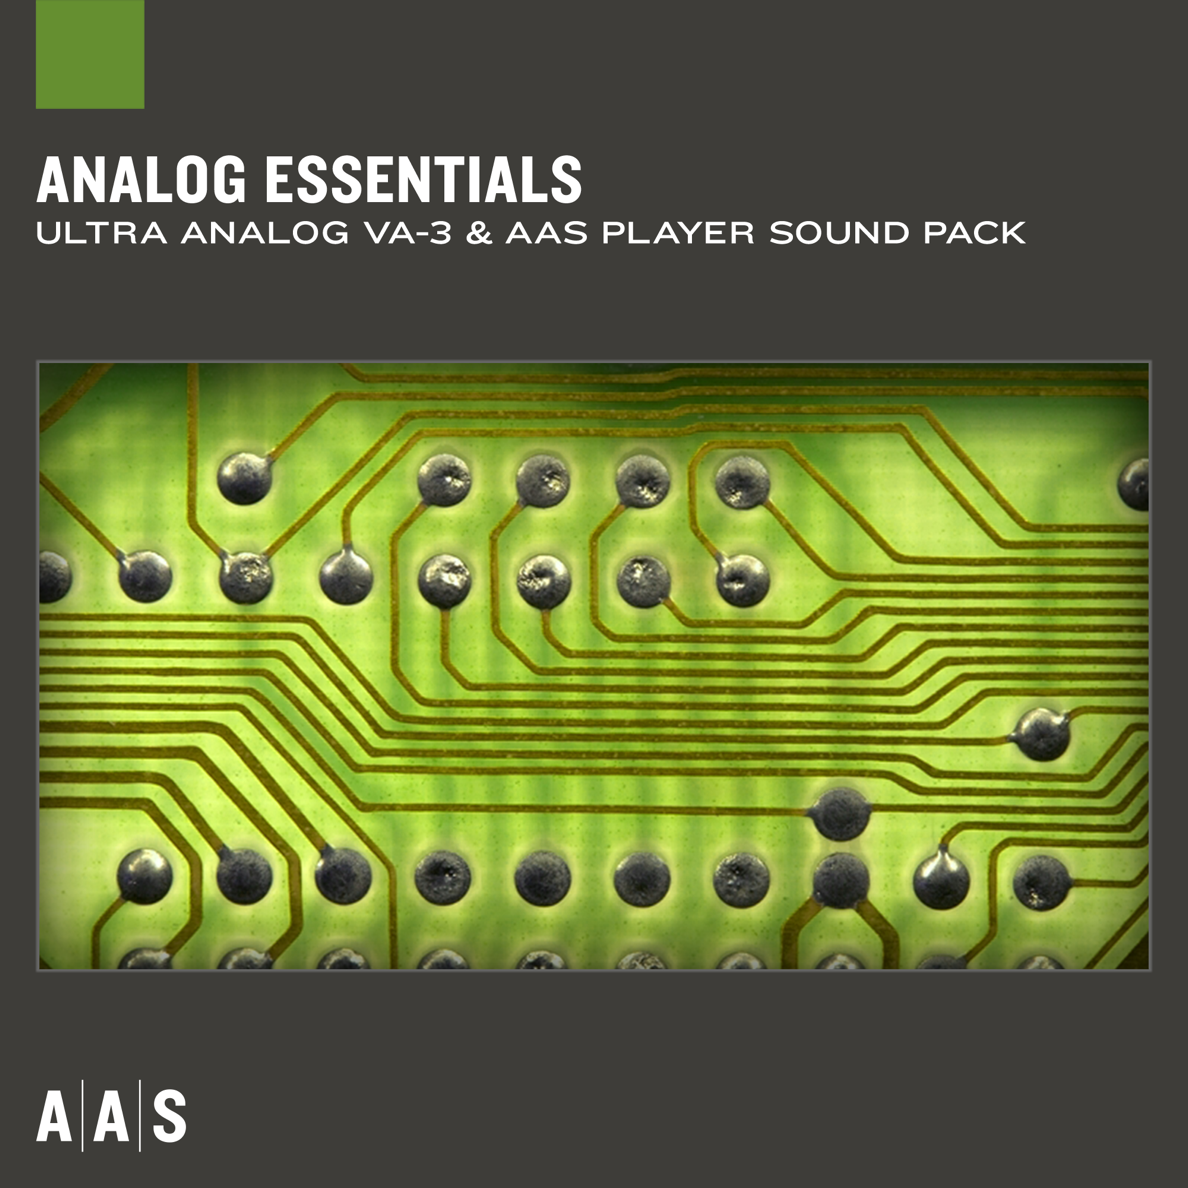 Ultra Analog and AAS Player sound pack ： Analog Essentials